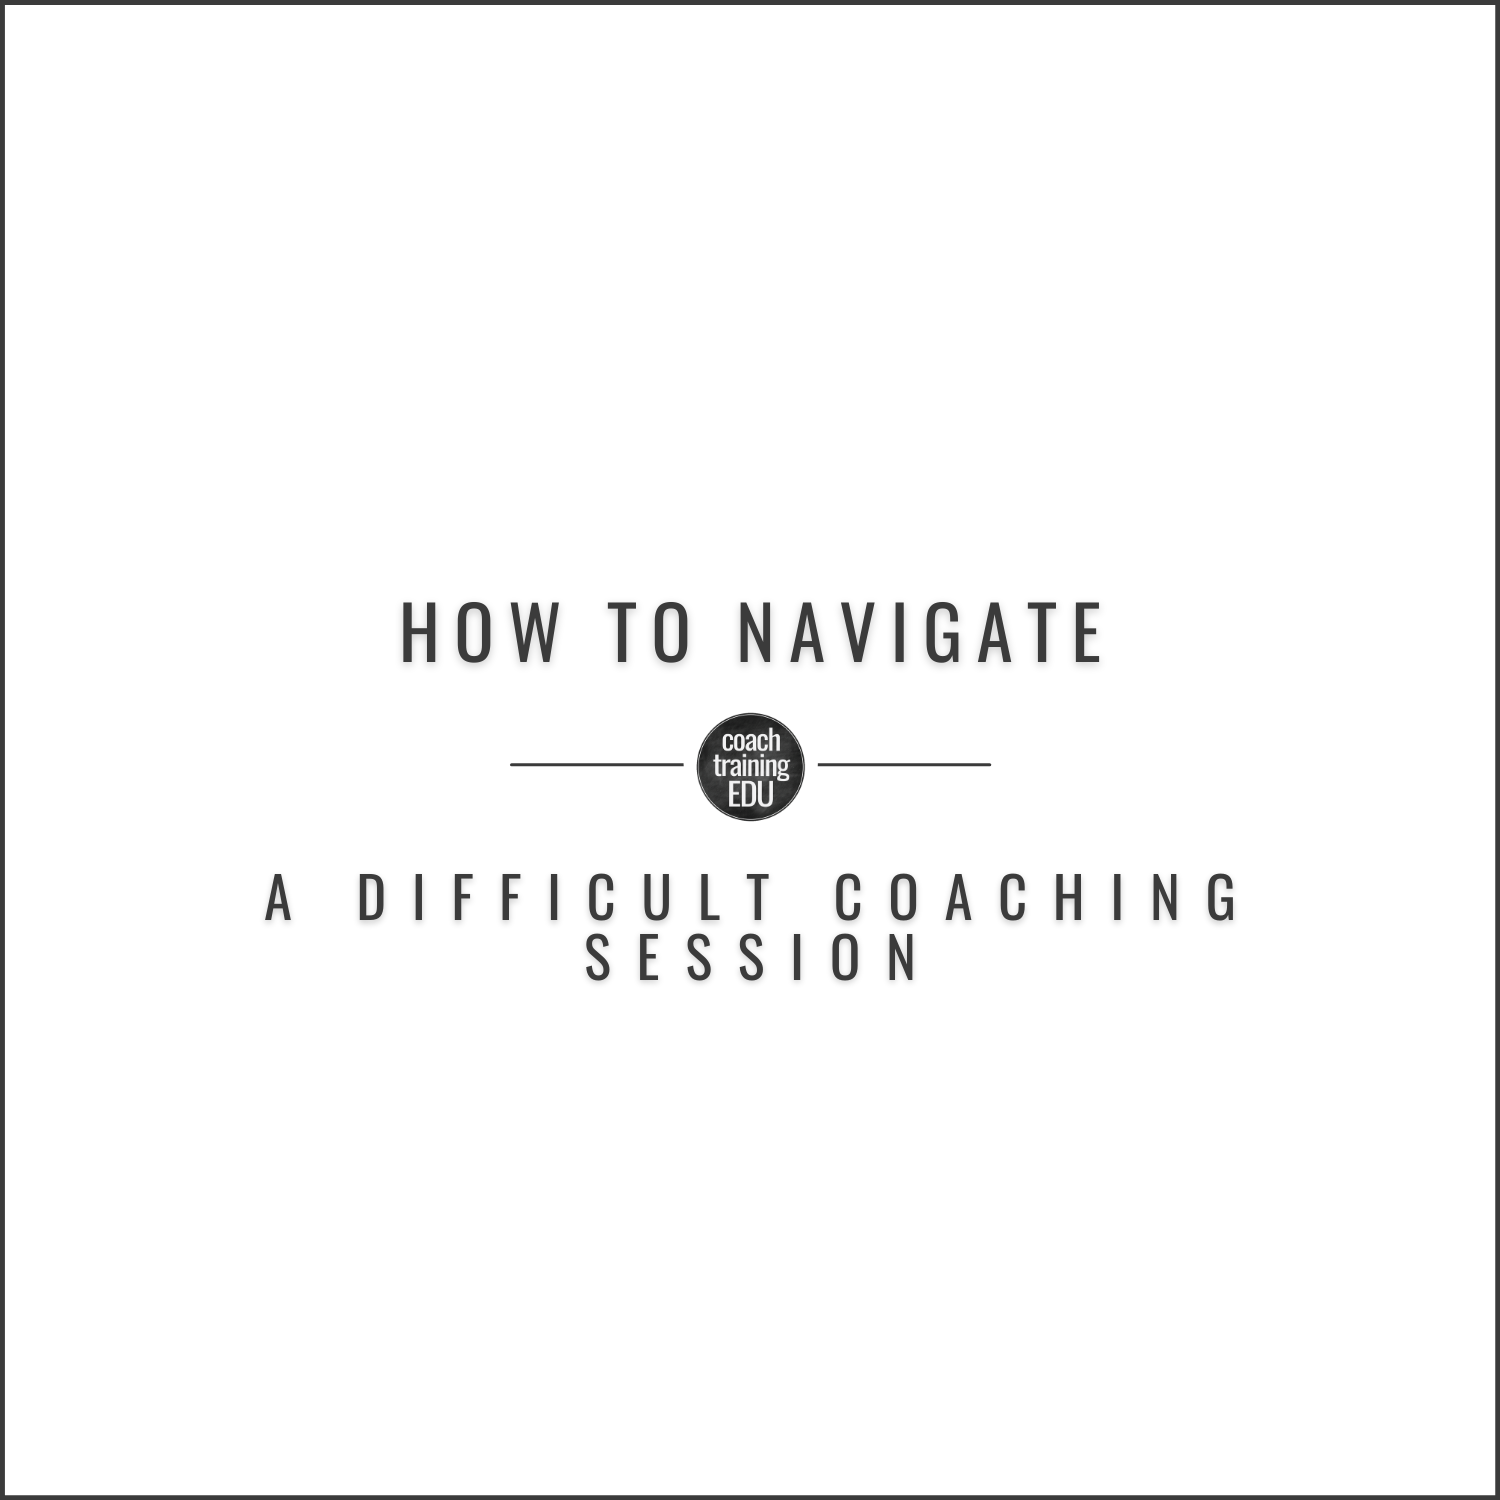 How to Navigate a Difficult Coaching Session